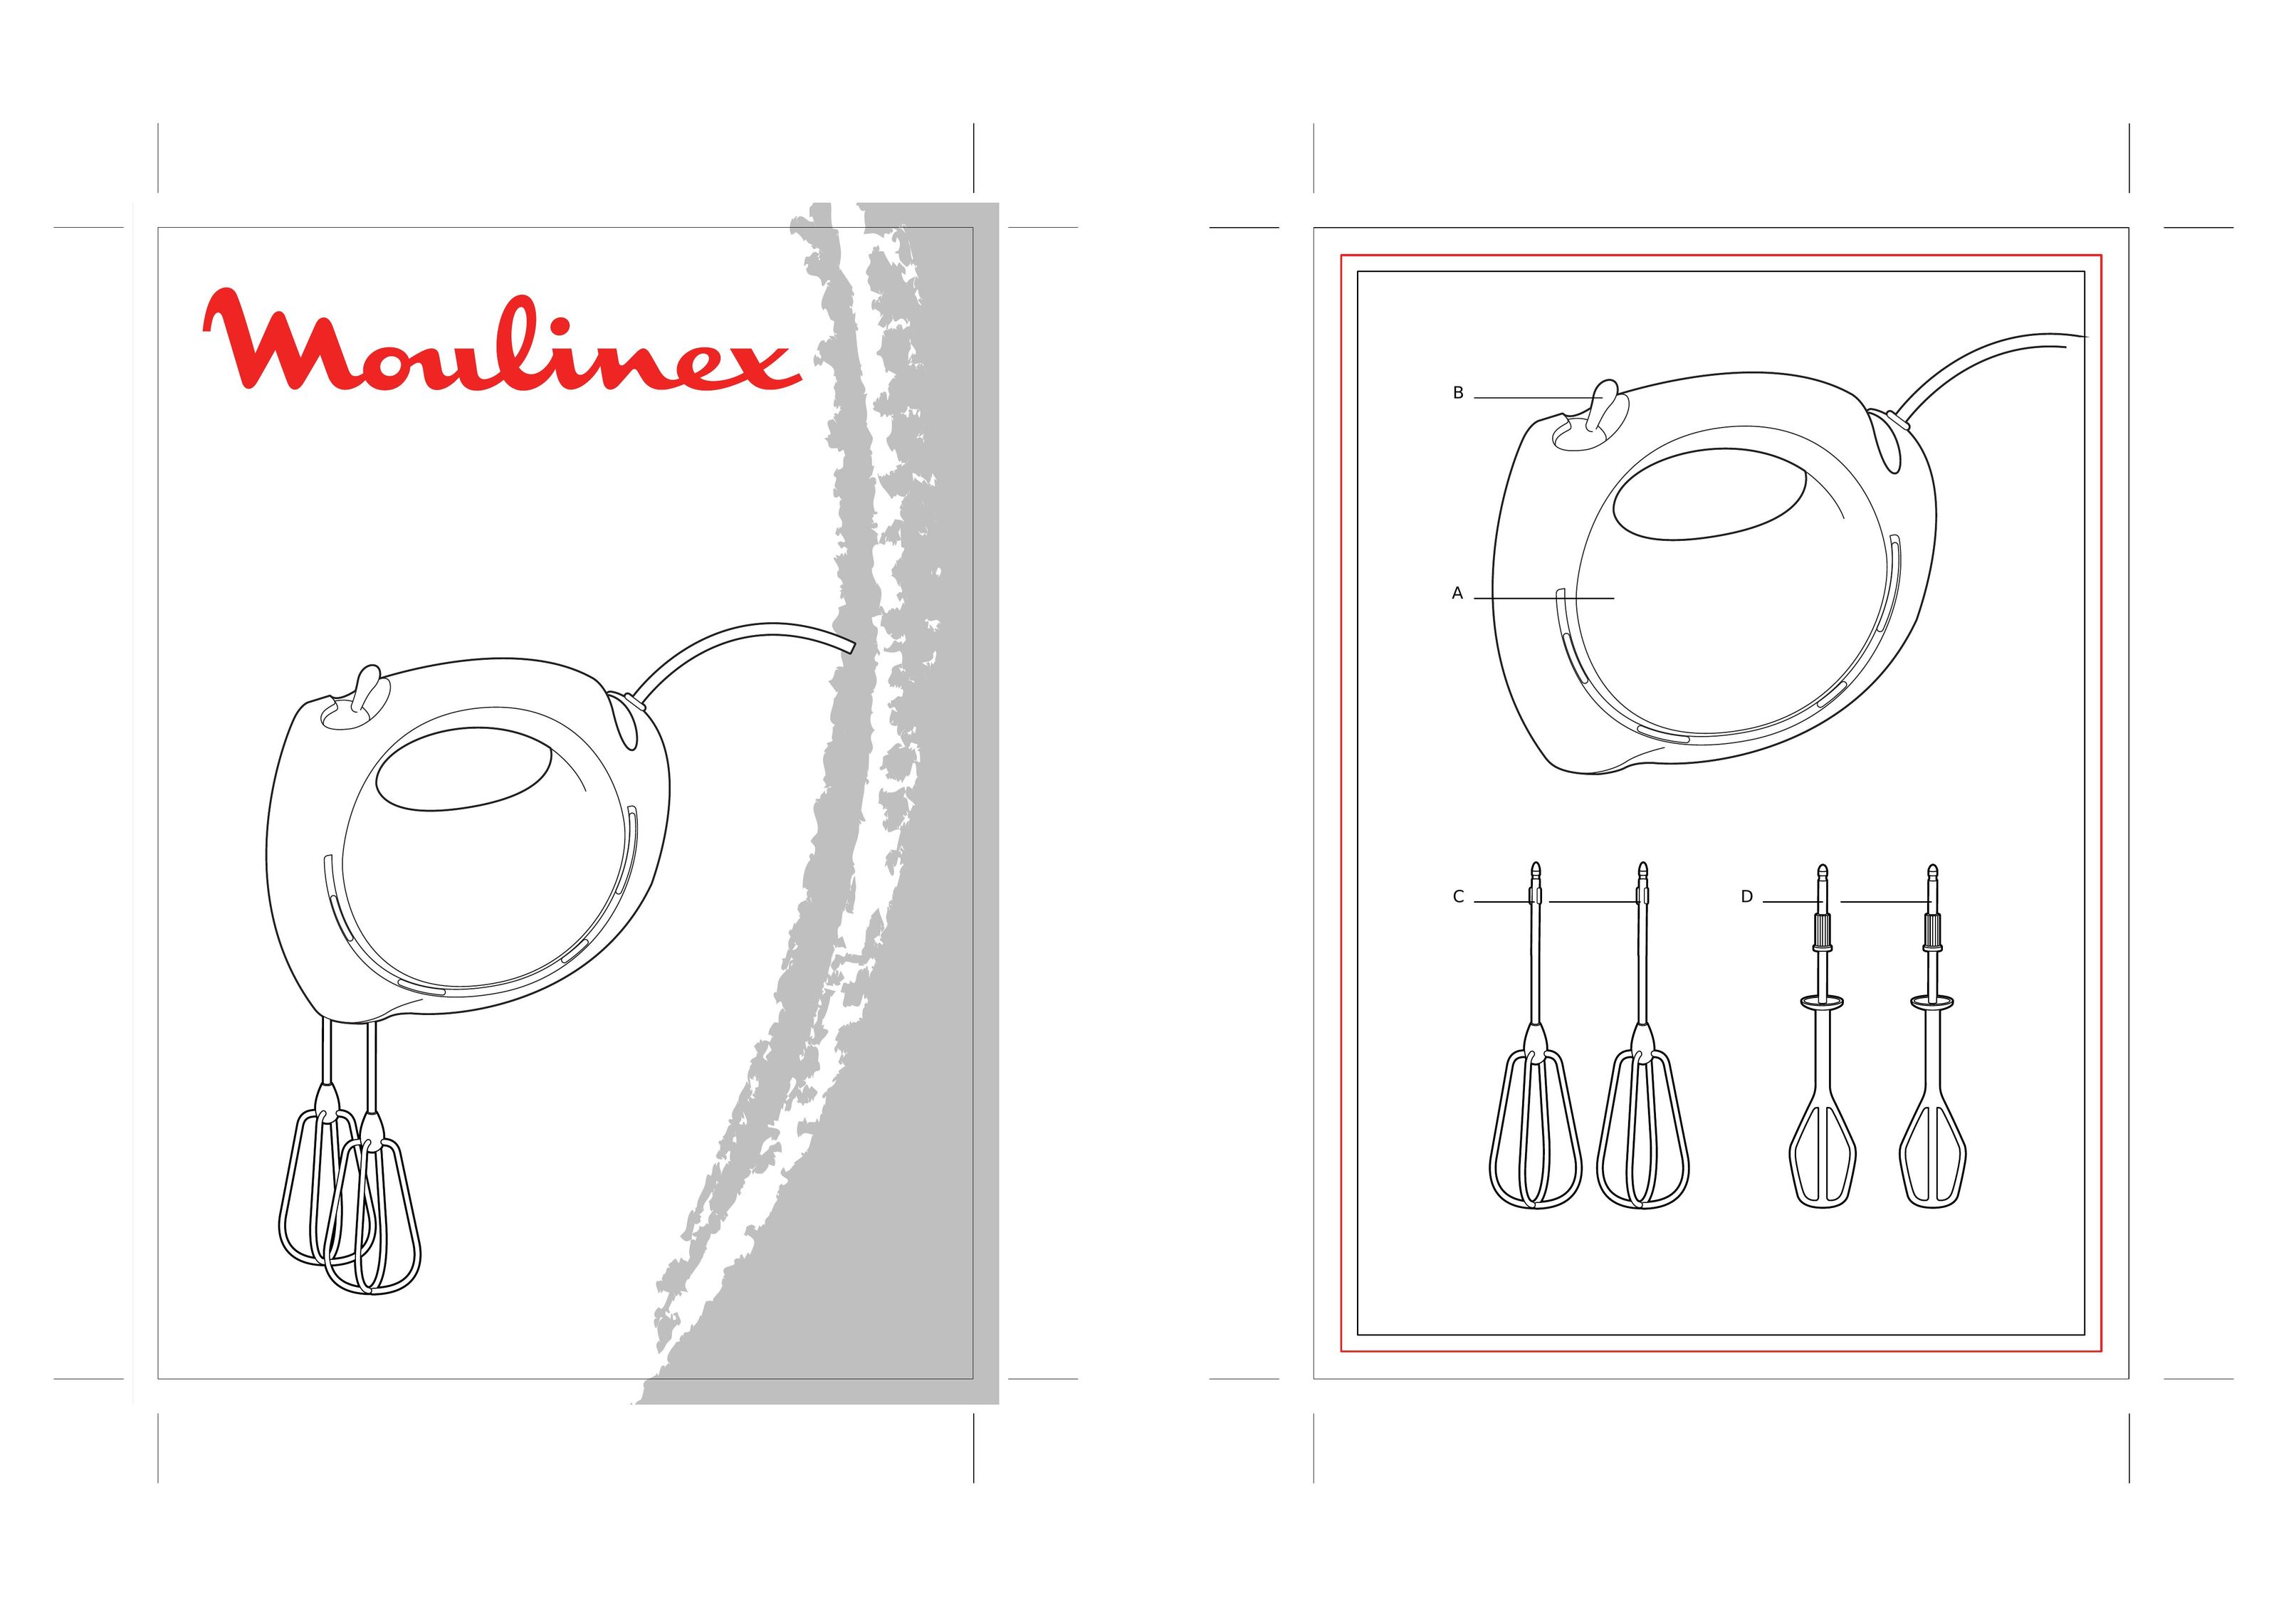 Moulinex hand-mixer Mixer User Manual (Page 1)